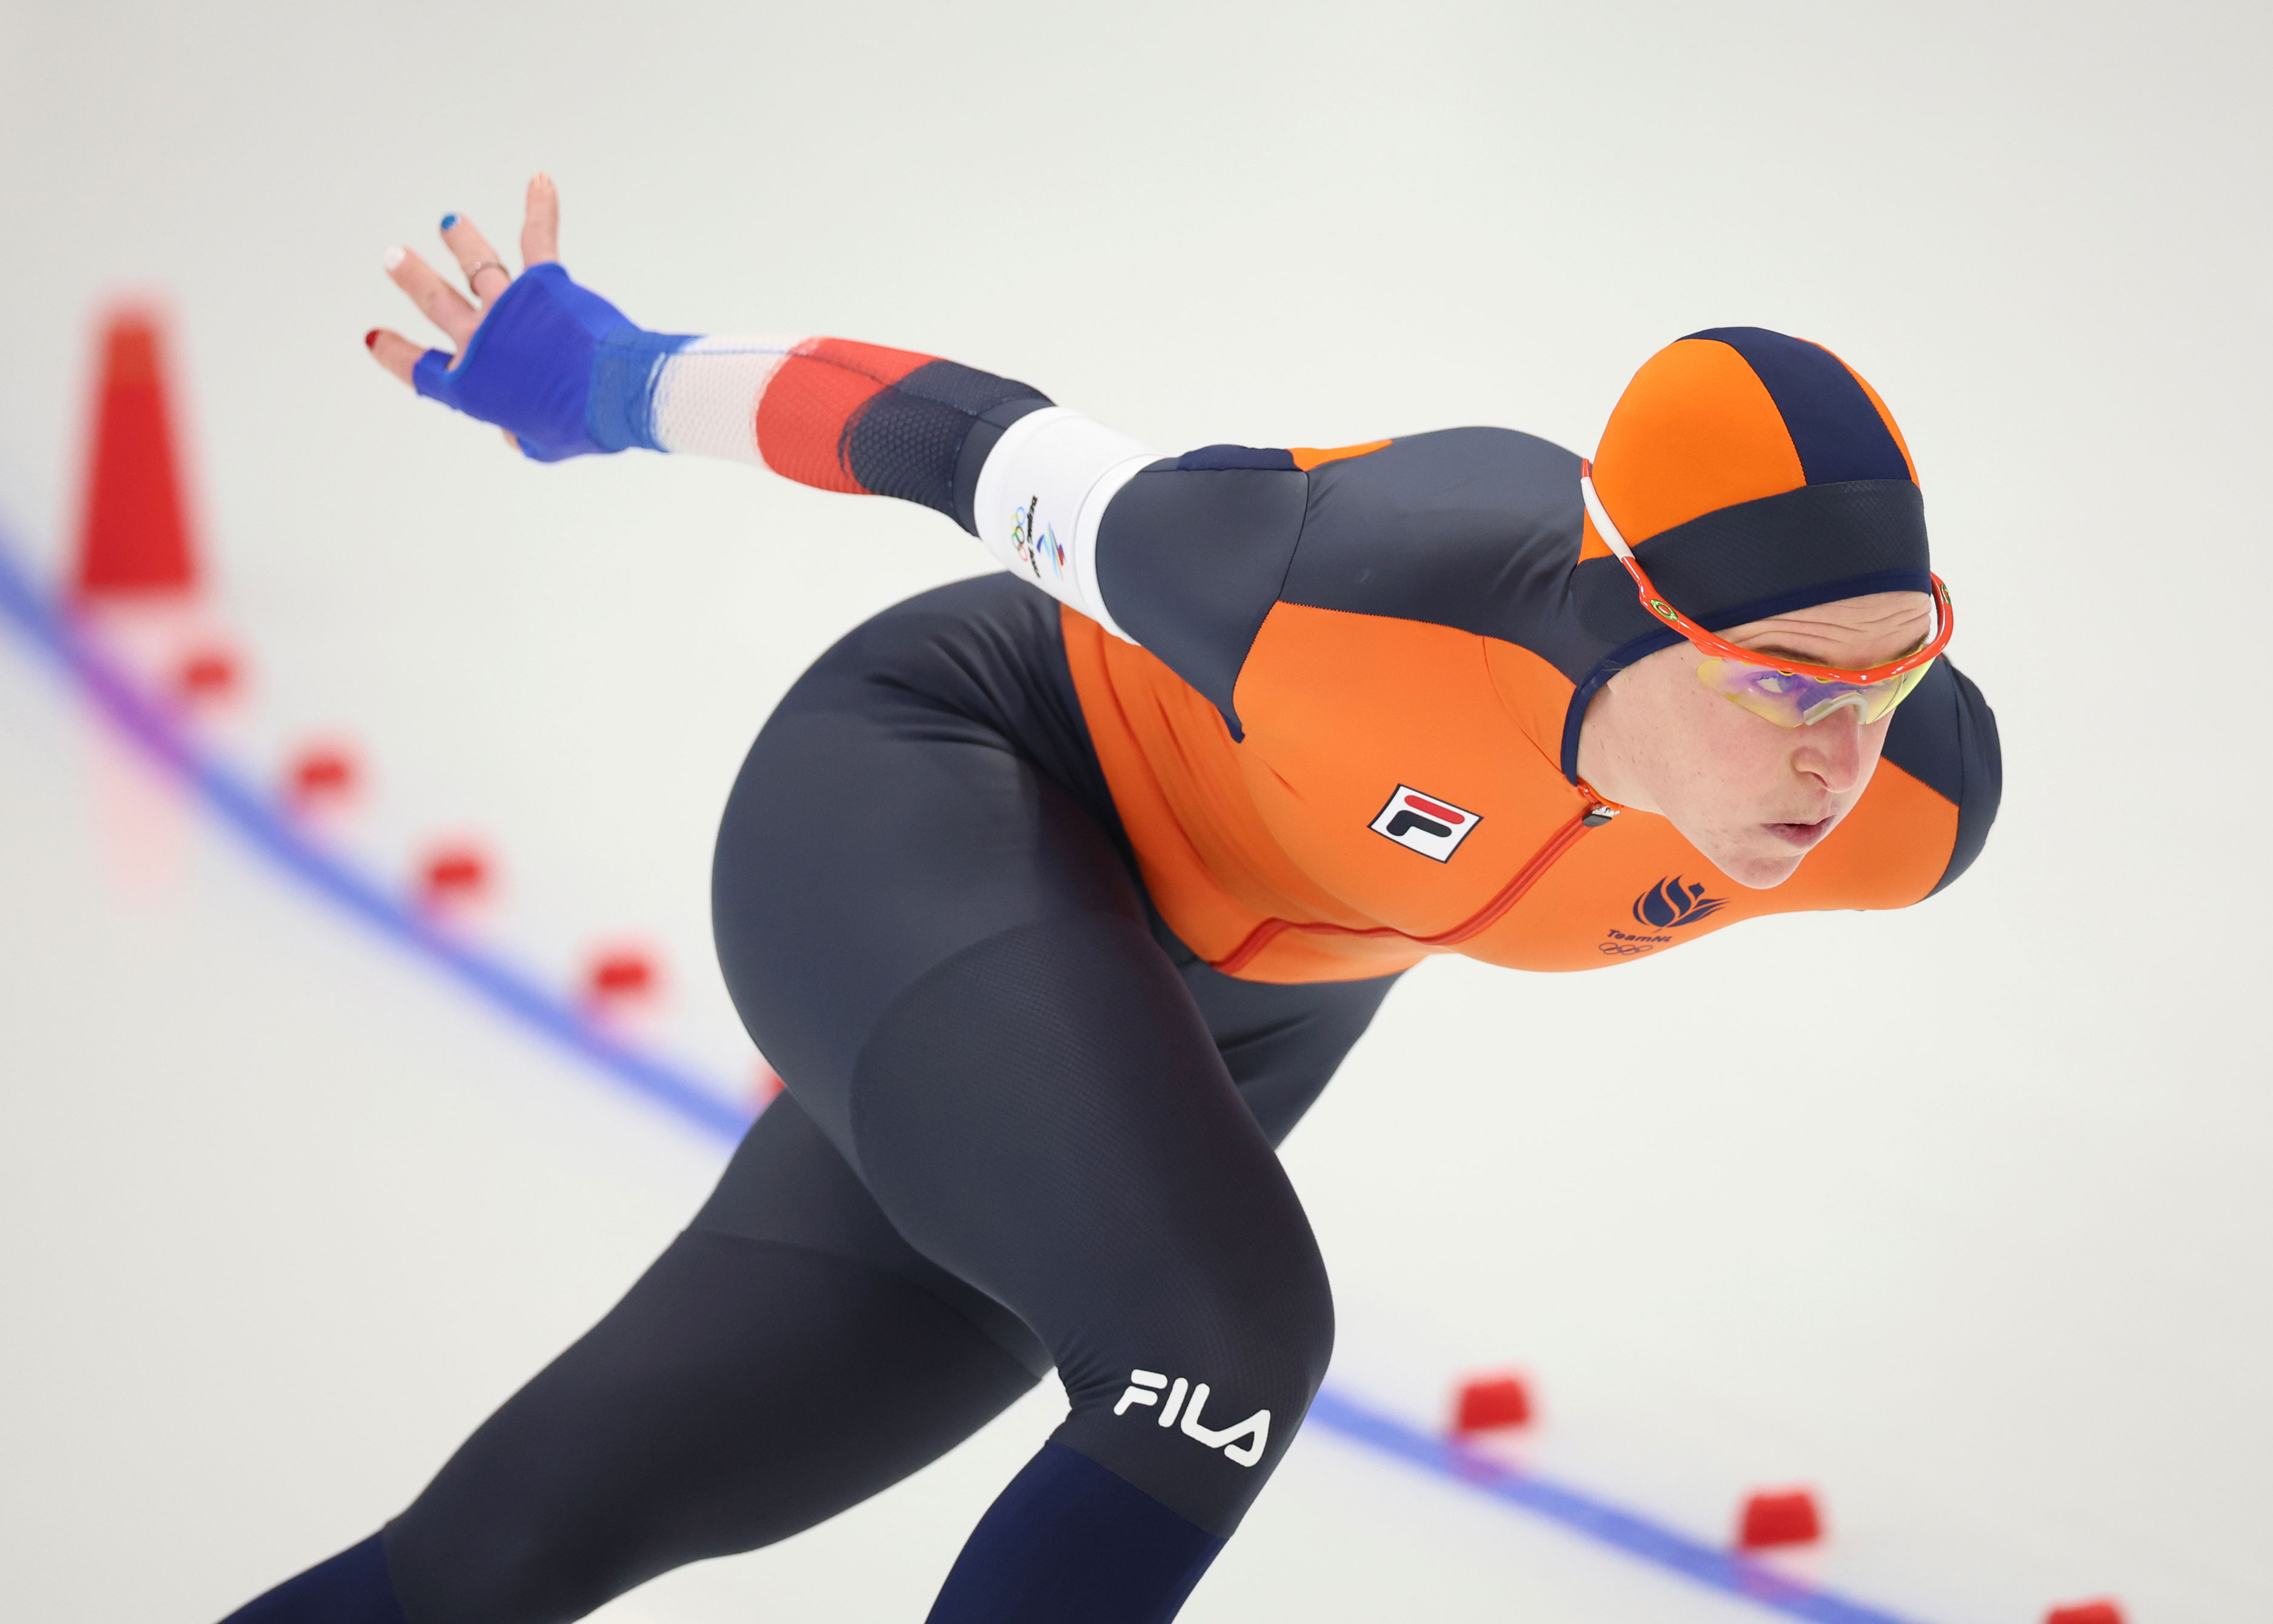 Ireen Wüst competing at the National Speed Skating Oval in Beijing on Feb. 7.